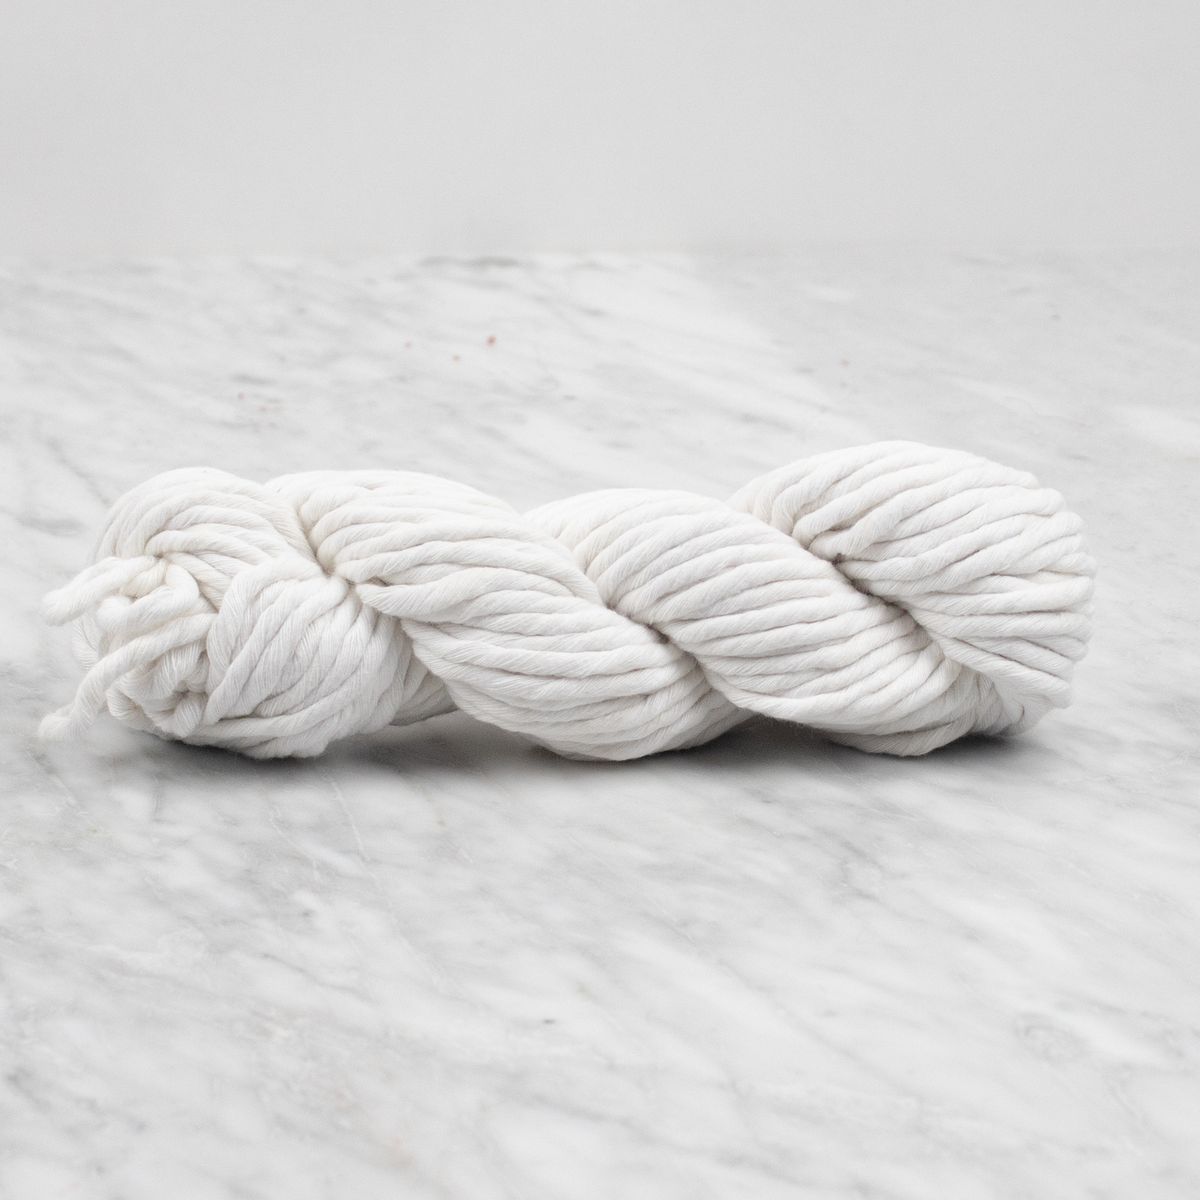 5mm Hand-Dyed Cotton String - Woolly White - 100 grams